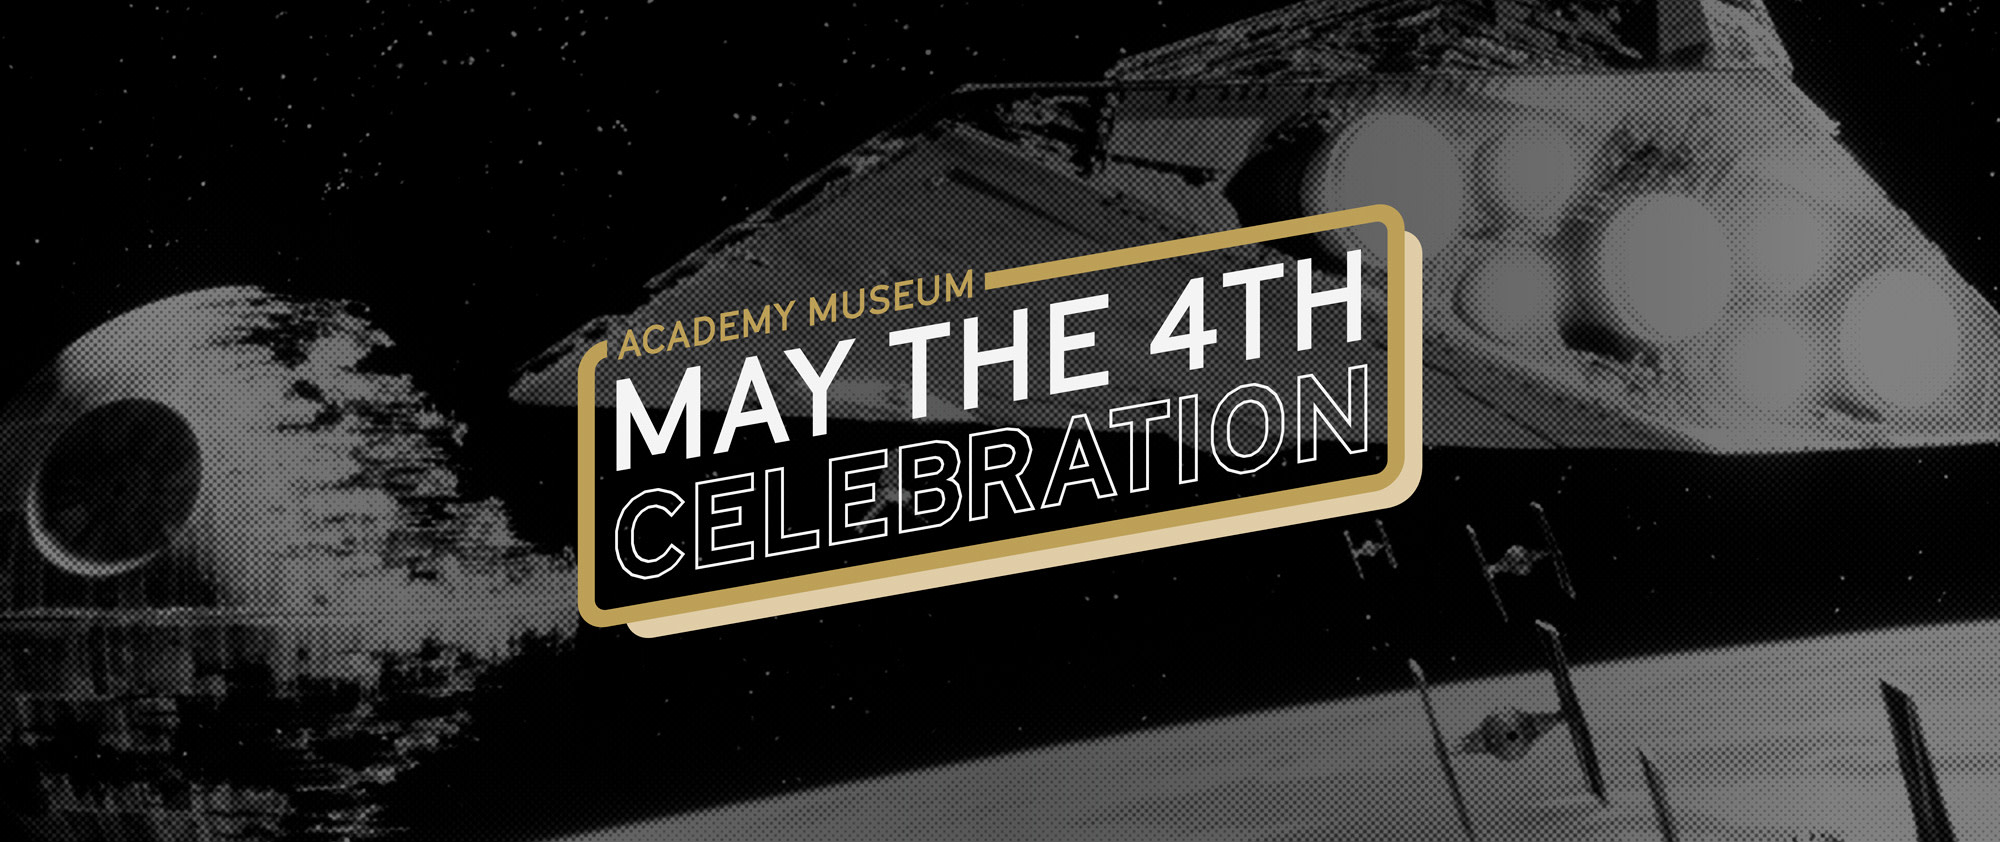 Image of Star Wars spaceship in black and white with text reading "The Academy Museum May the 4th Celebration" 